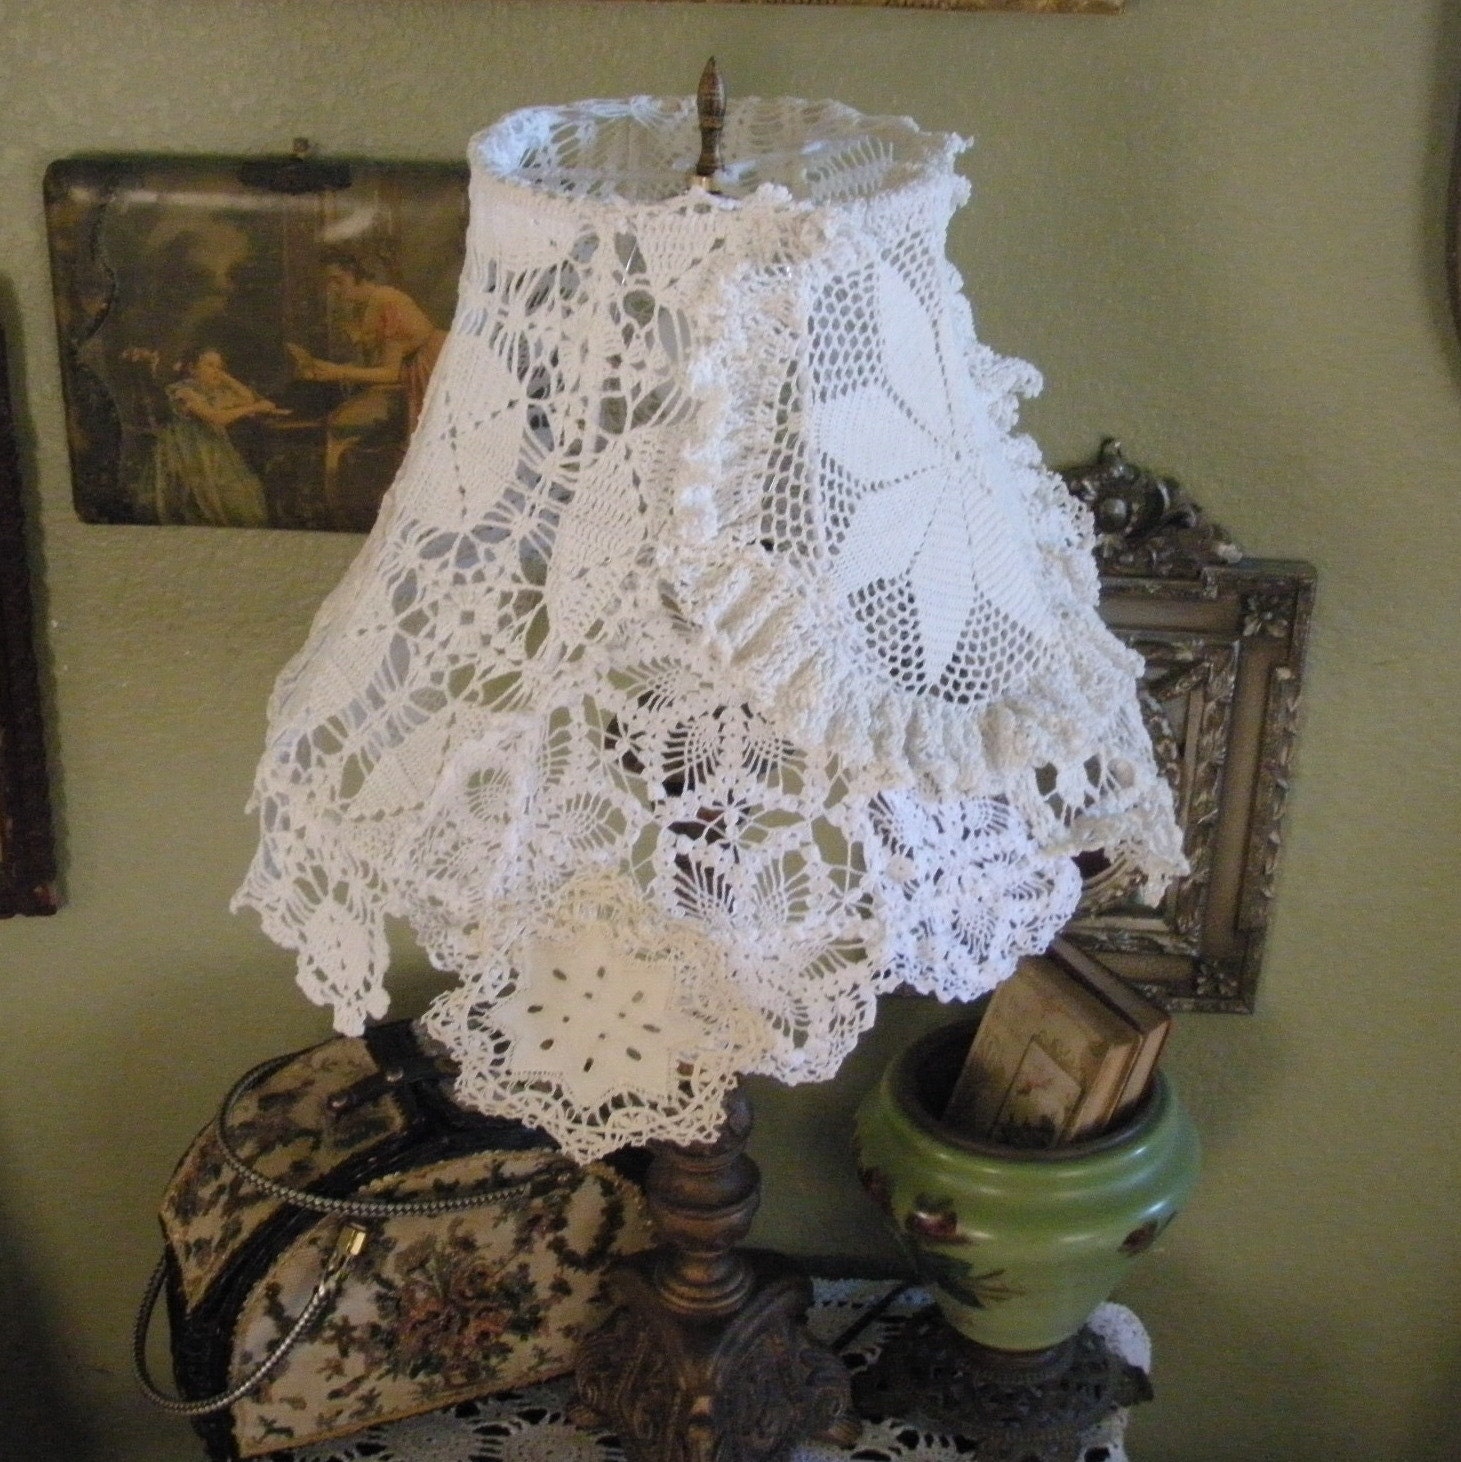 Lace Lamp Shades on Doilies Lace Lamp Shade Handmade Multi Sided Romantic Cottage Chic